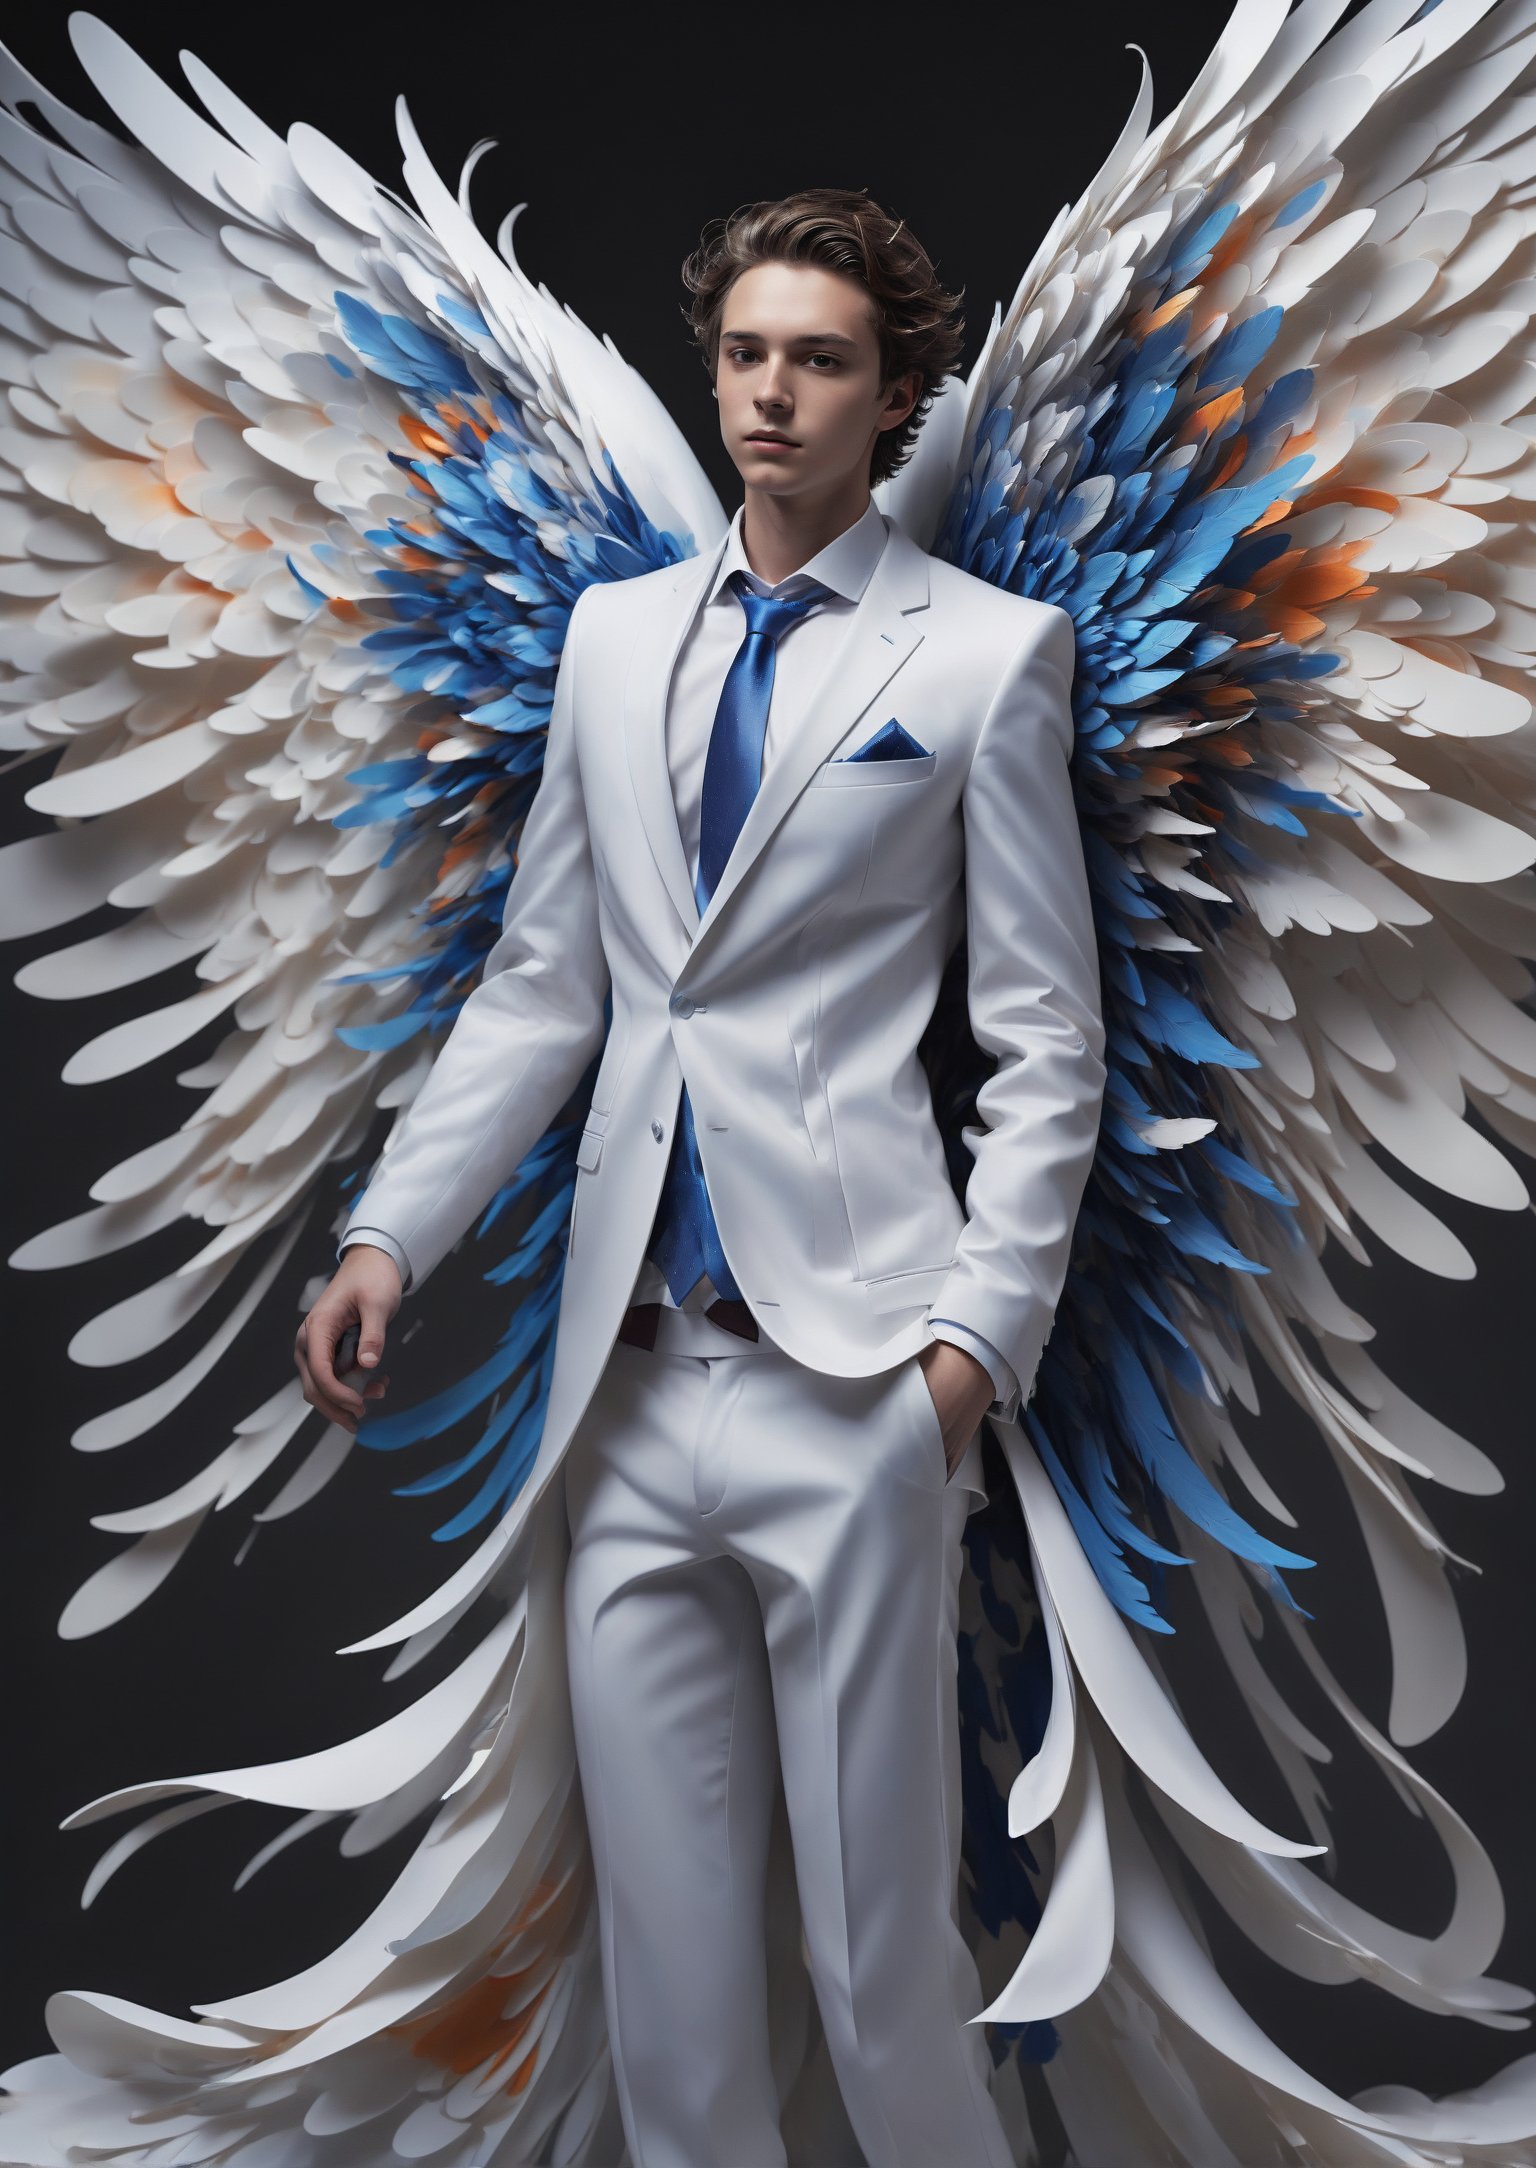 Create an image of a young man wearing a suit, featuring vibrant, dark and blue wings extending from his back. Random movement The background should be plain white, emphasizing the contrast and detailing of the beauty wings and the sharpness of the suit. The man should appear poised and elegant, with the wings unfurled to showcase a spectrum of vivid hues, blending seamlessly from one color to another. The focus should be on the meticulous details of the wings’ feathers and the suit’s fabric, capturing a harmonious blend of natural and refined elements, wings,Stylish, close up,l3min,xxmixgirl